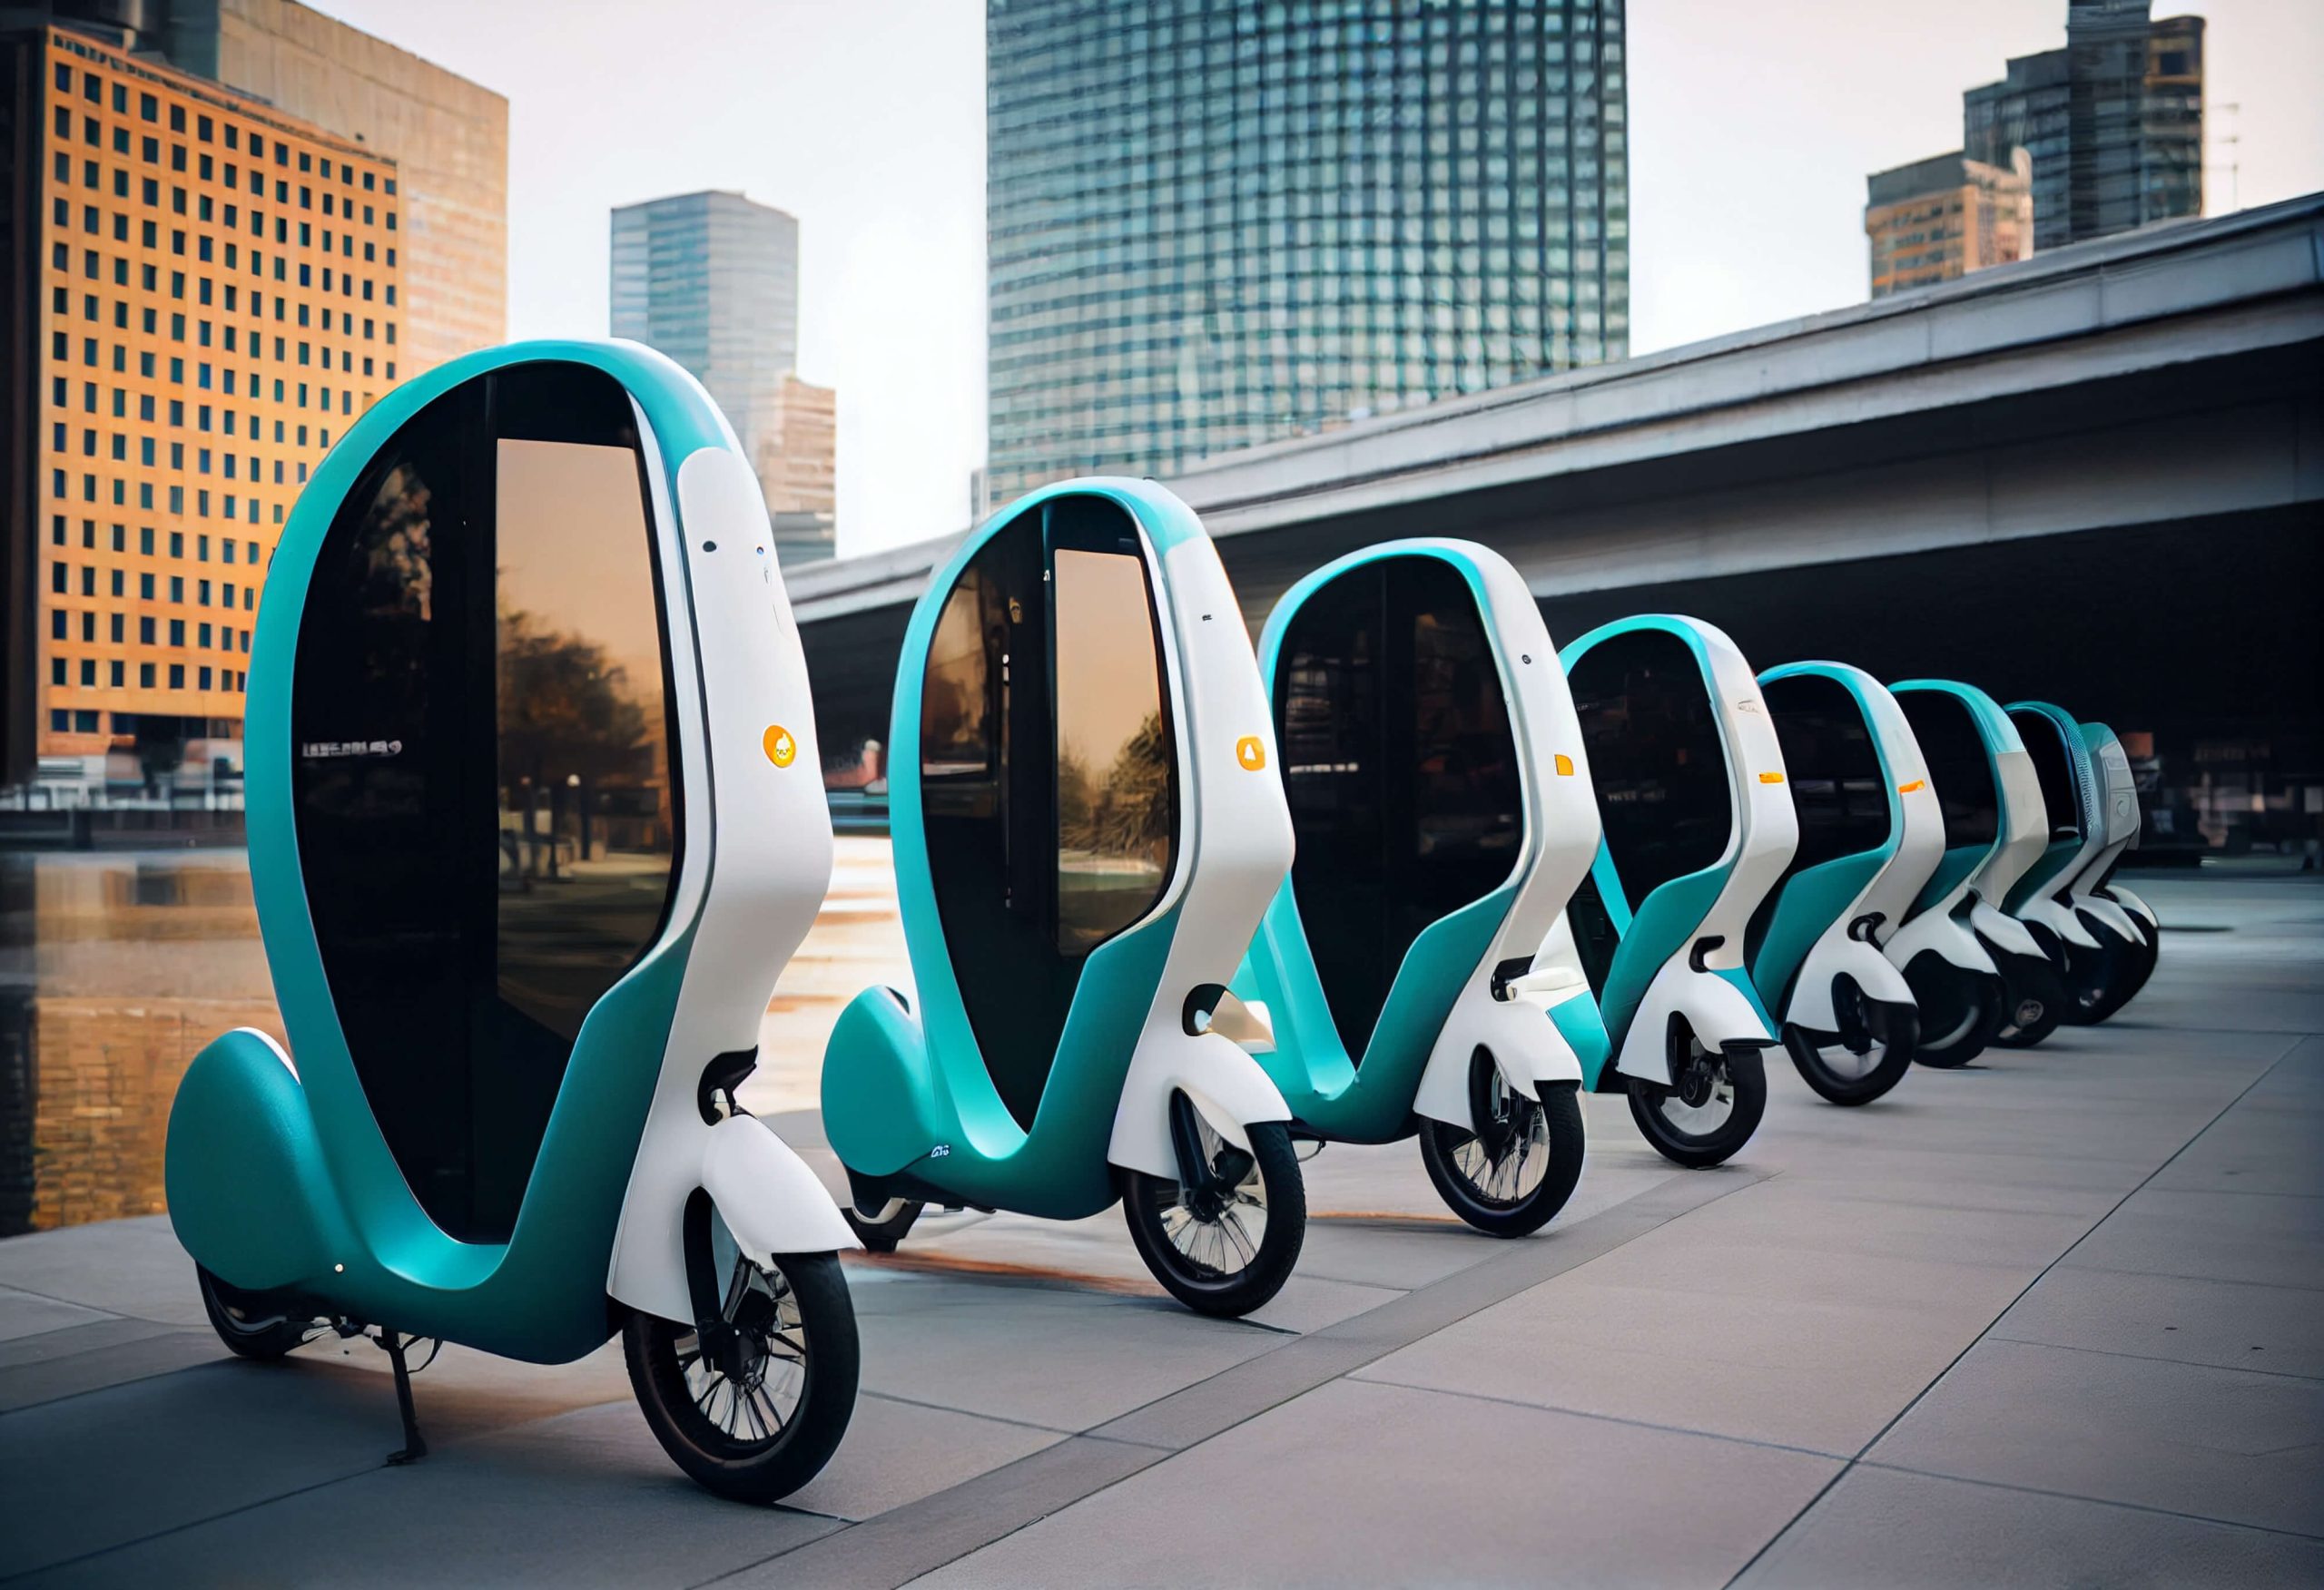 A futuristic concept image of last mile transport. The image shows motorised scooters with person sized bubbles around the seat to protect the rider from the elements. Automotive market research is important to the development of last-mile transport.